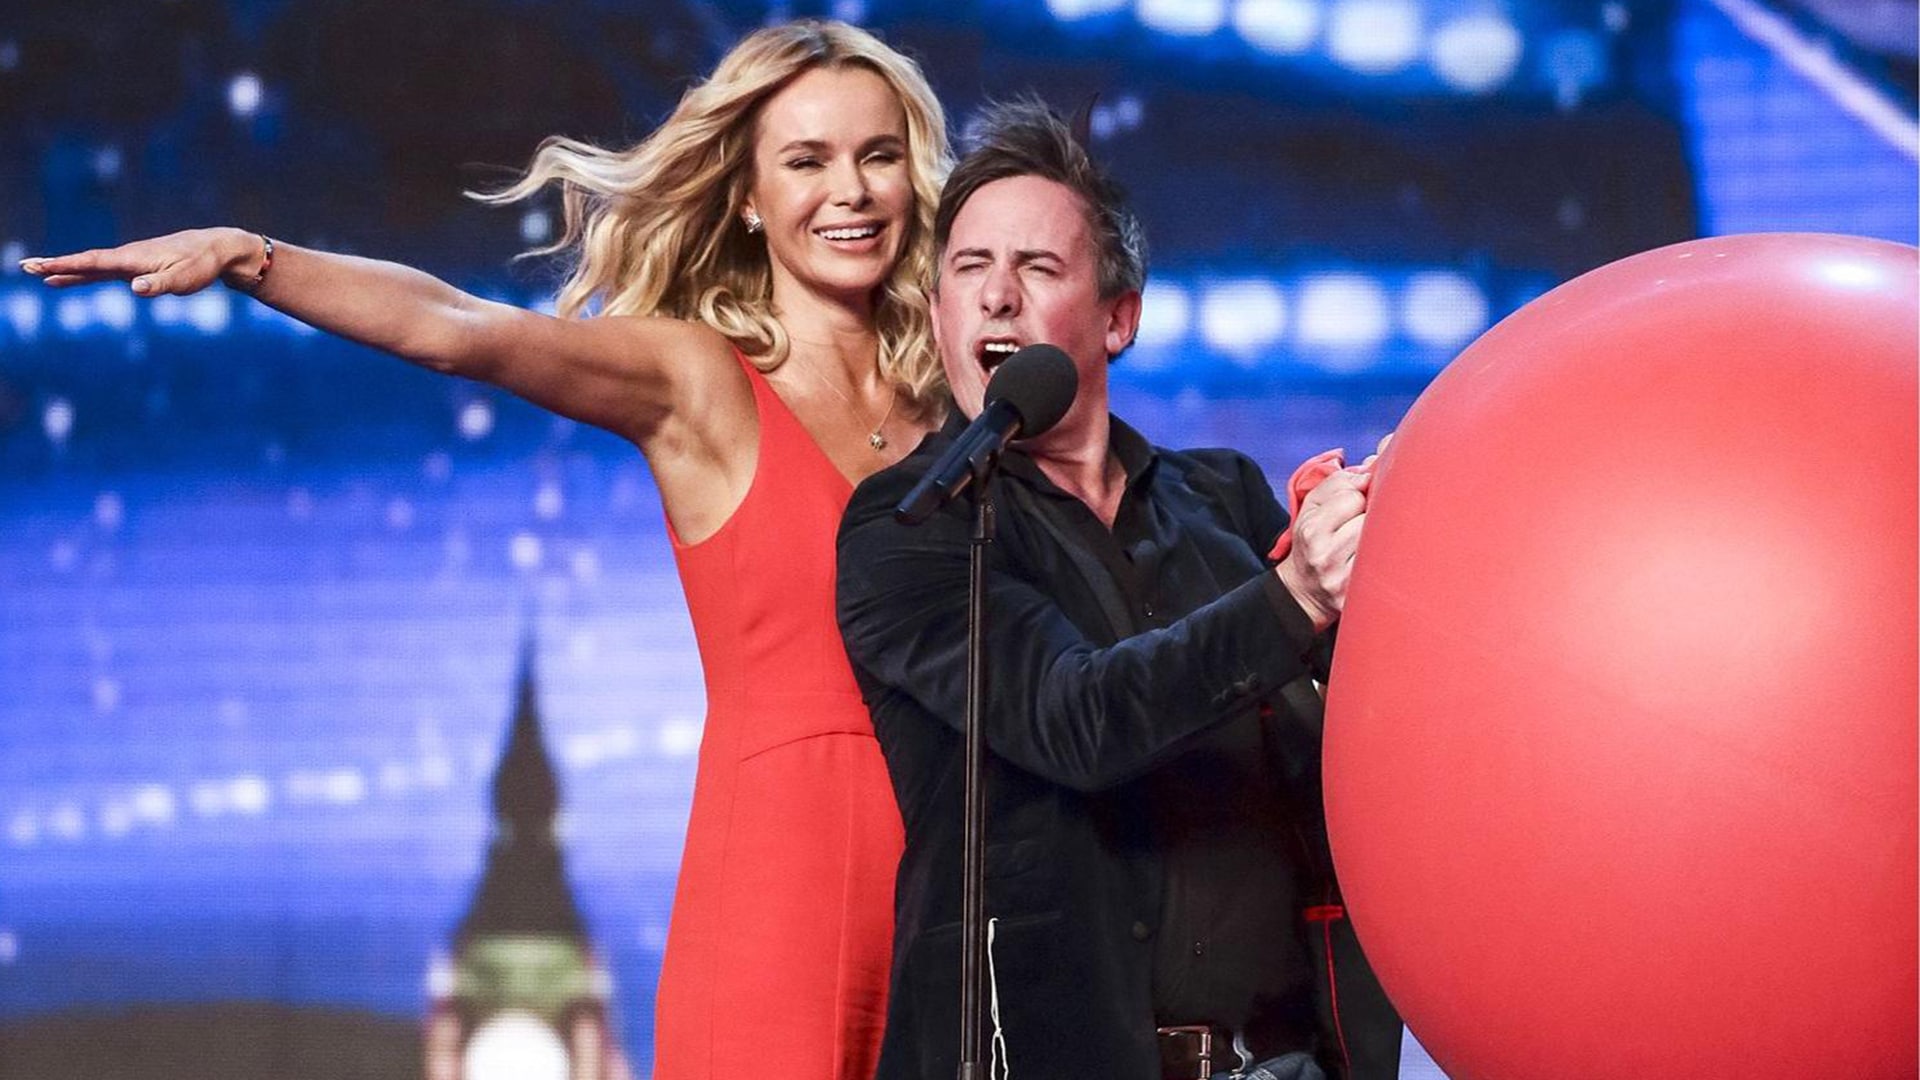 Christian Lee performing in Britain's Got Talent, standing next to Amanda Holden while holding a massive red balloon